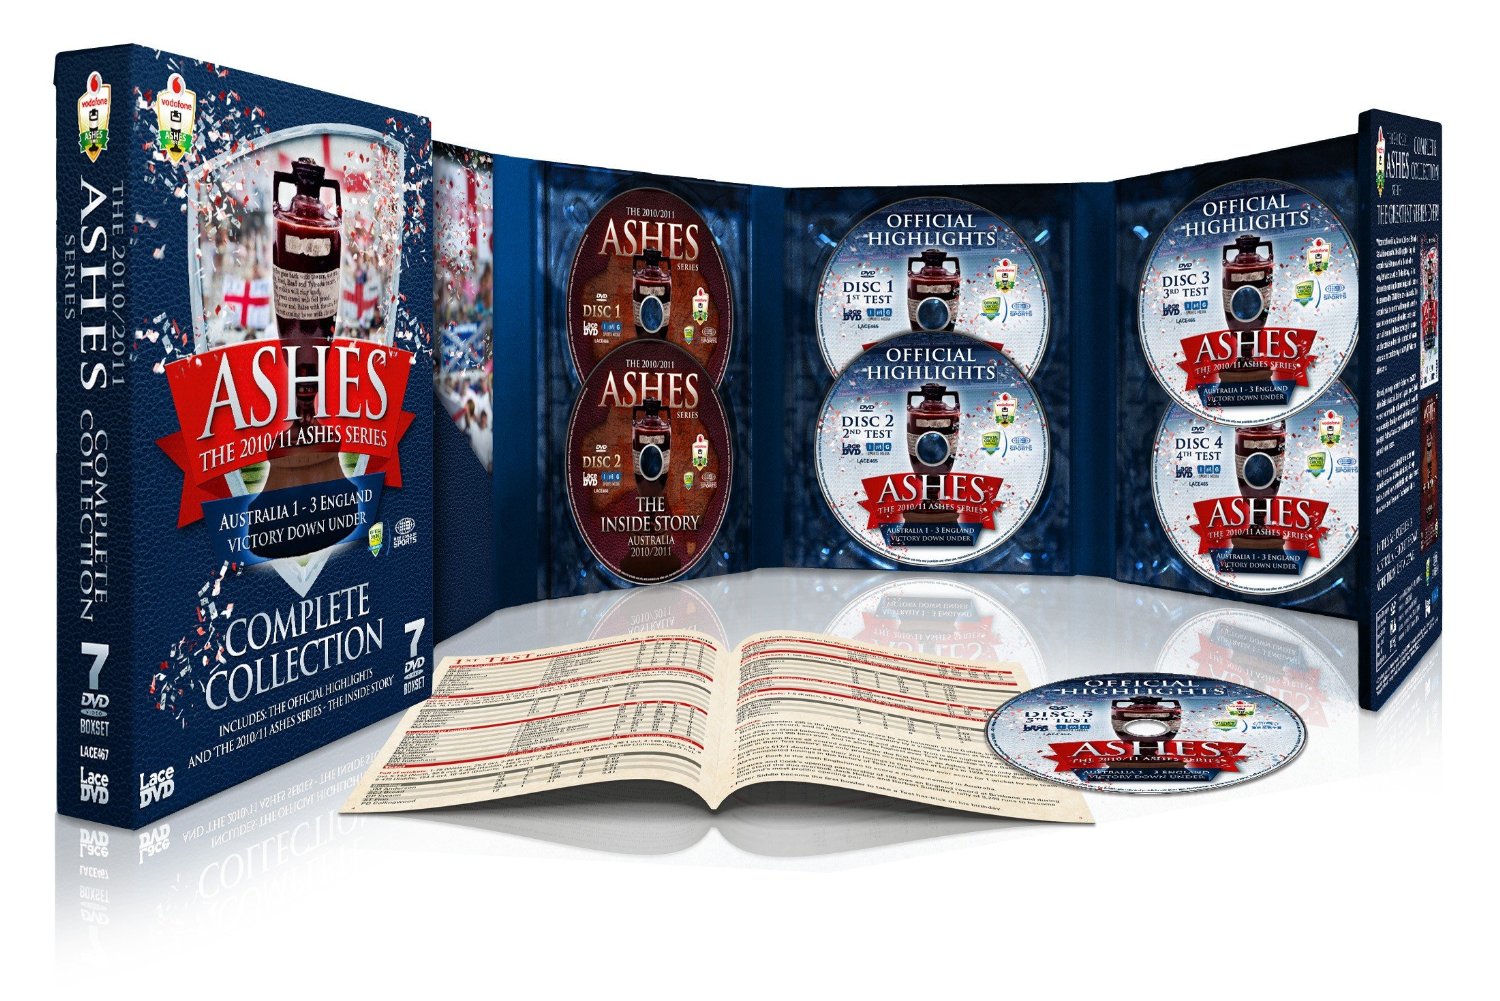 The Ashes - Complete Collection - Australia 2010/2011 (Limited Edition Box Set) (DVD)